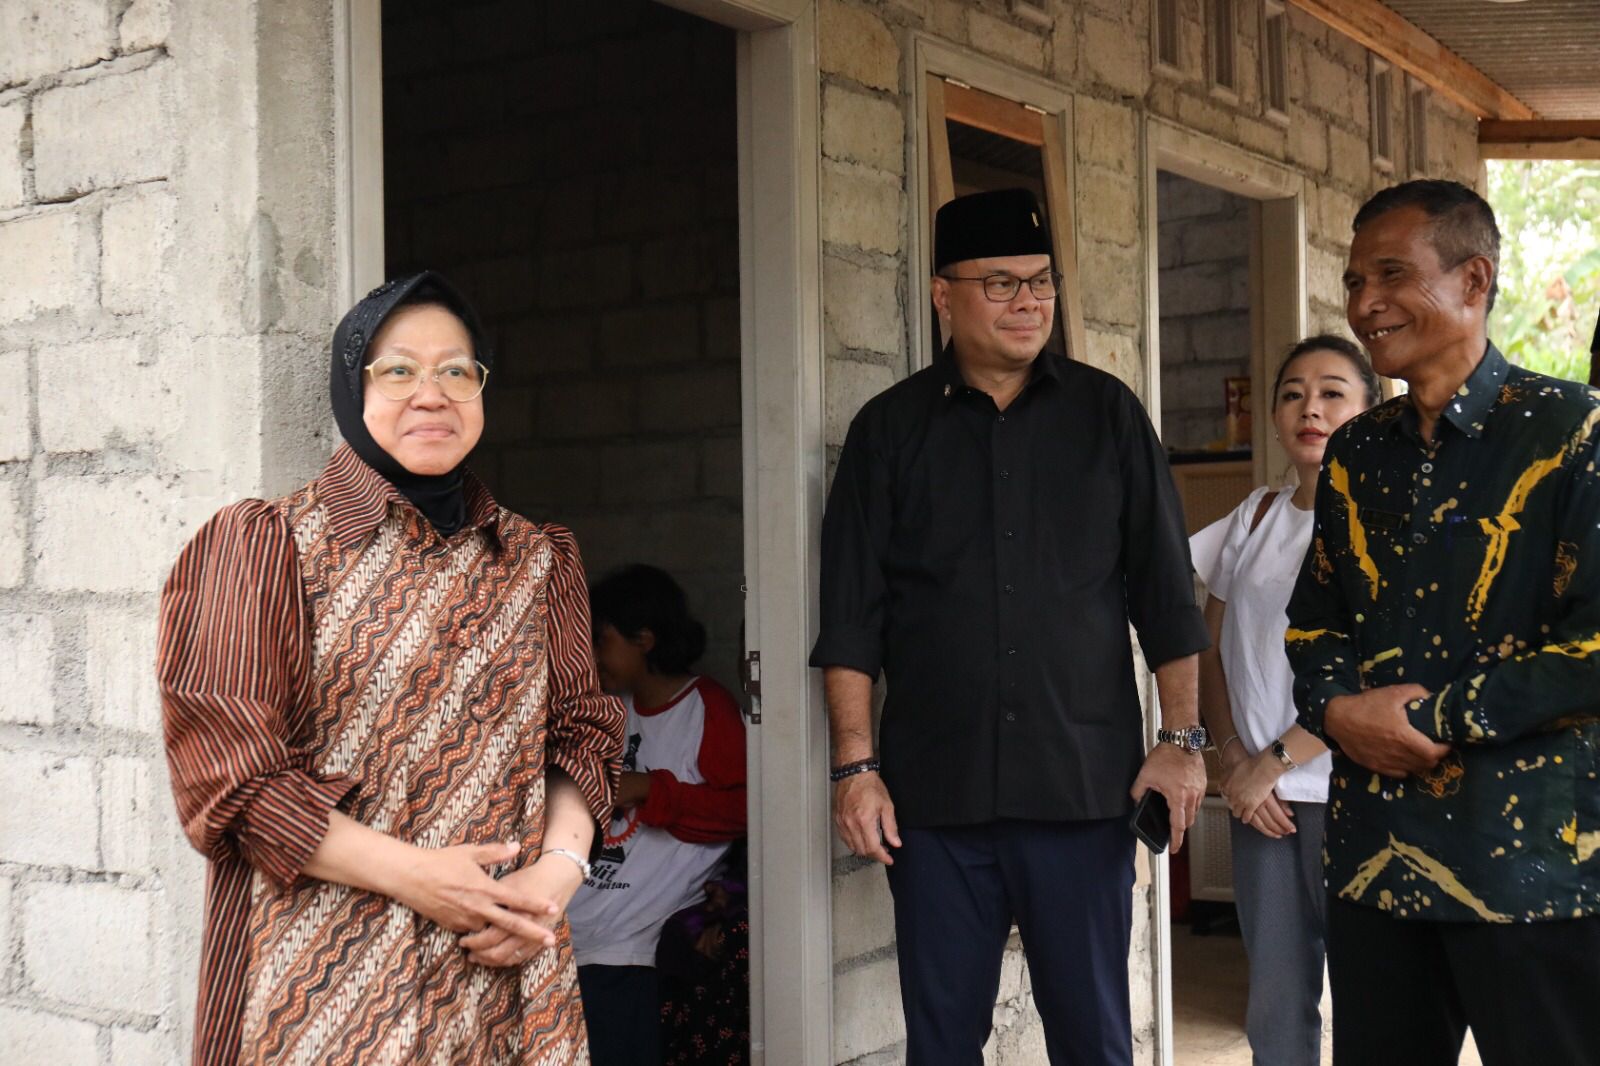 Minister of Social Affairs Reviews House Construction for Sasmiati, Mother of Three Children with Intellectual Disabilities